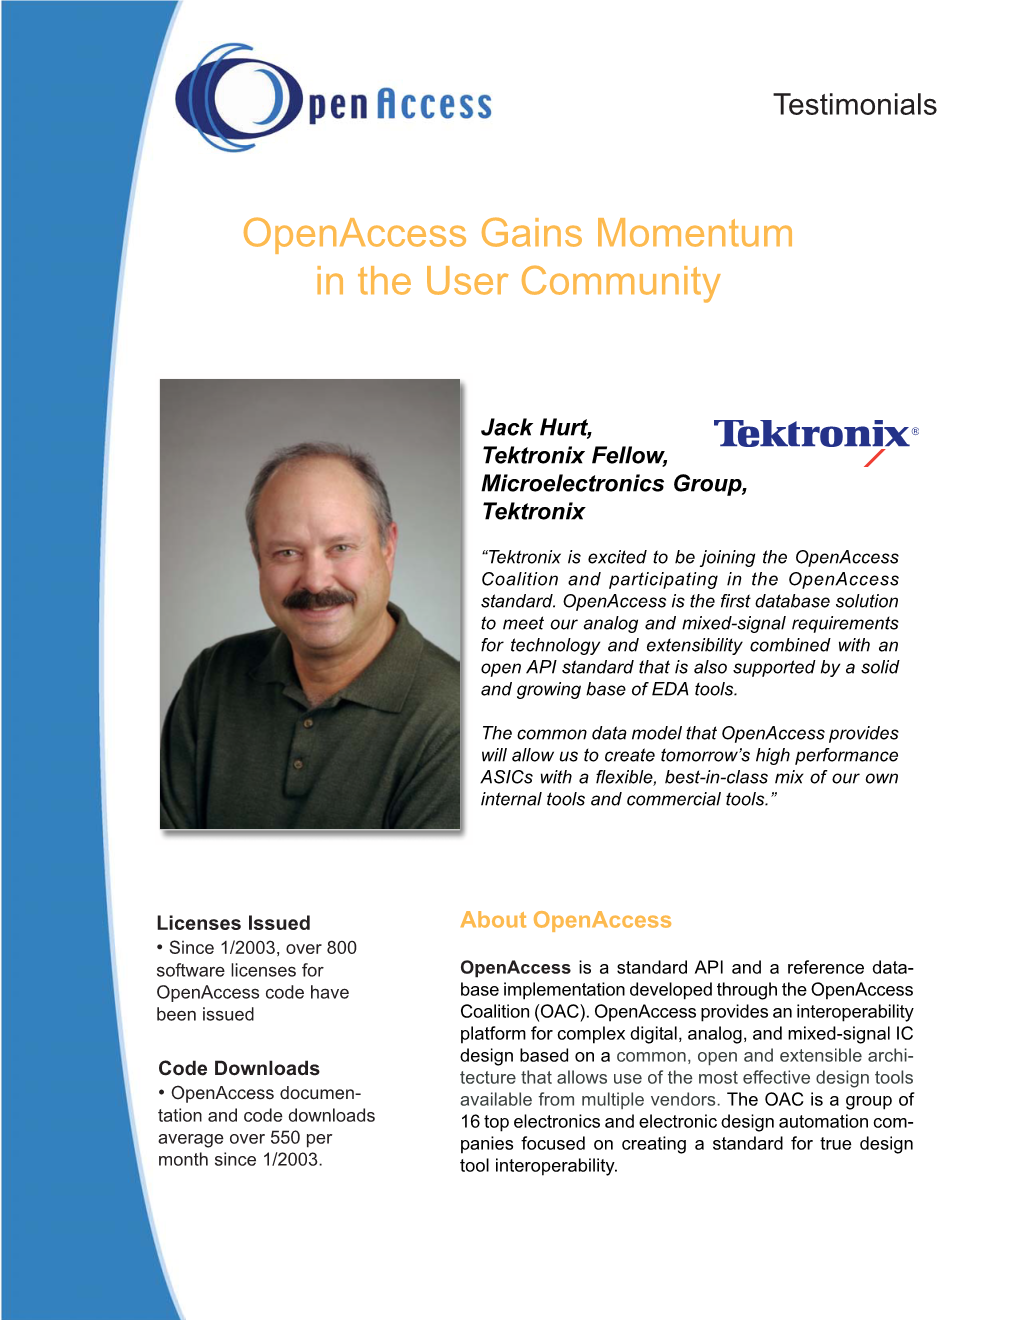 Openaccess Gains Momentum in the User Community